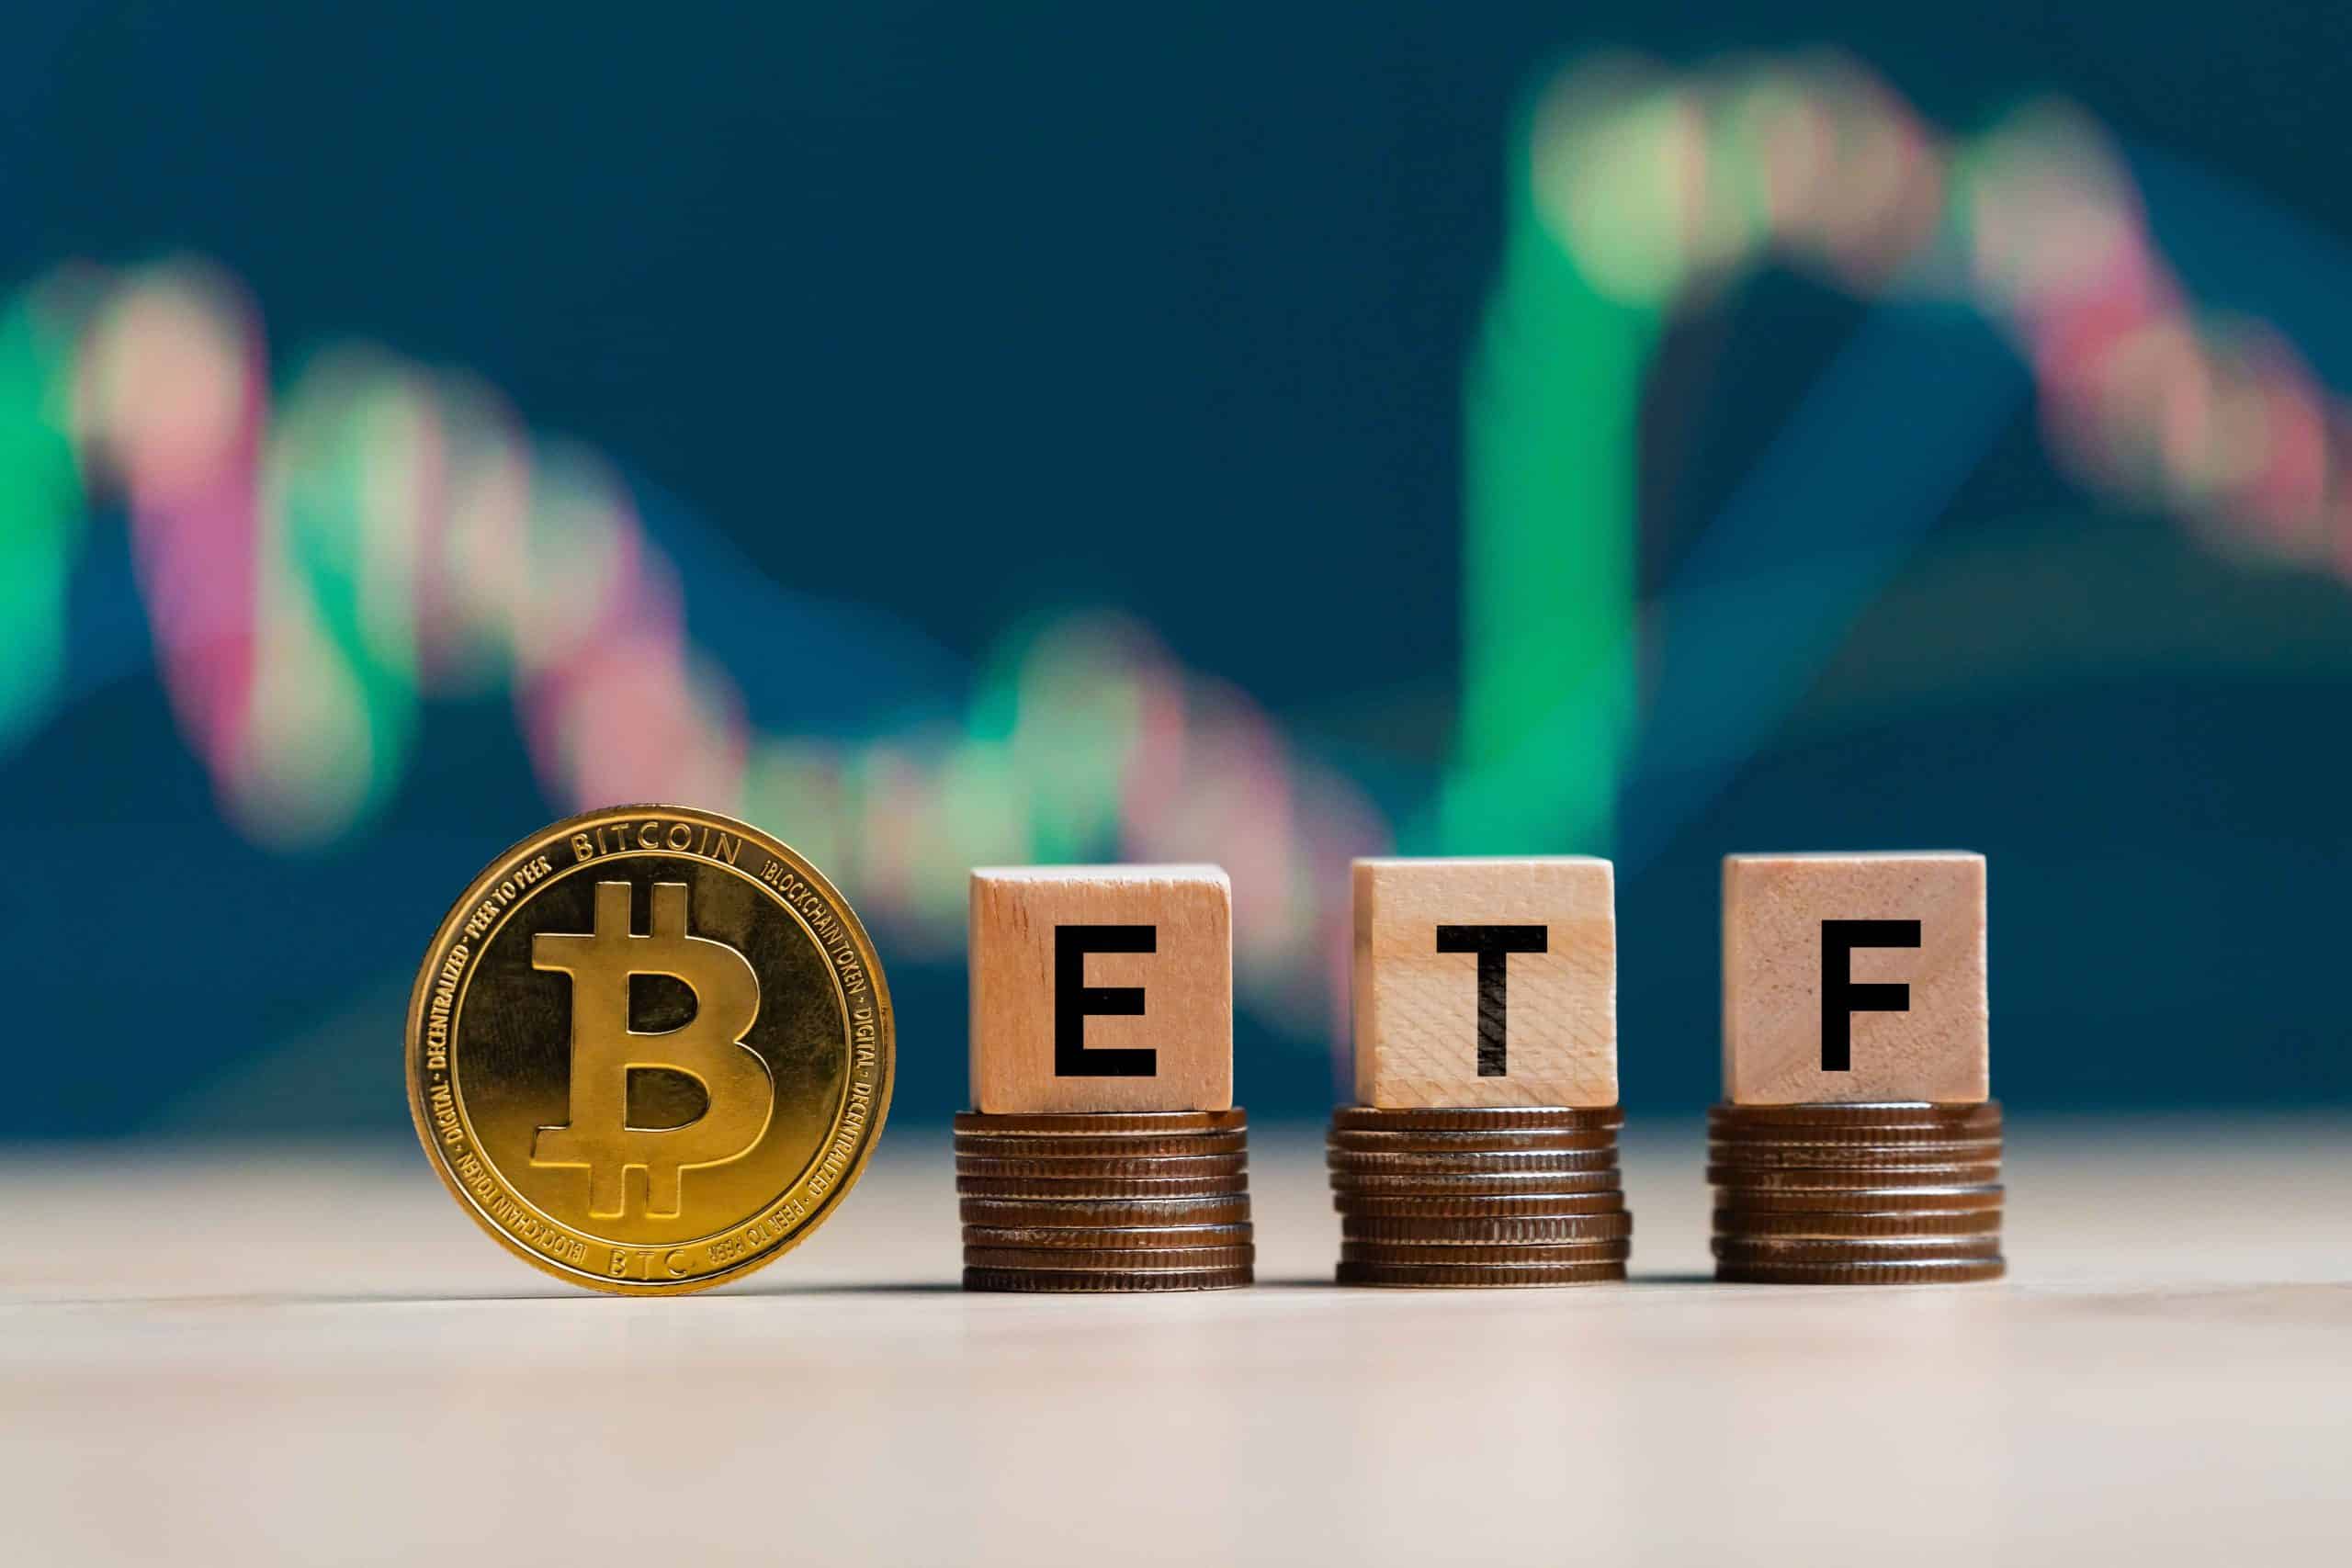 BlackRock set to buy $10 million in Bitcoin in anticipation of the spot ETF approval by the sec.